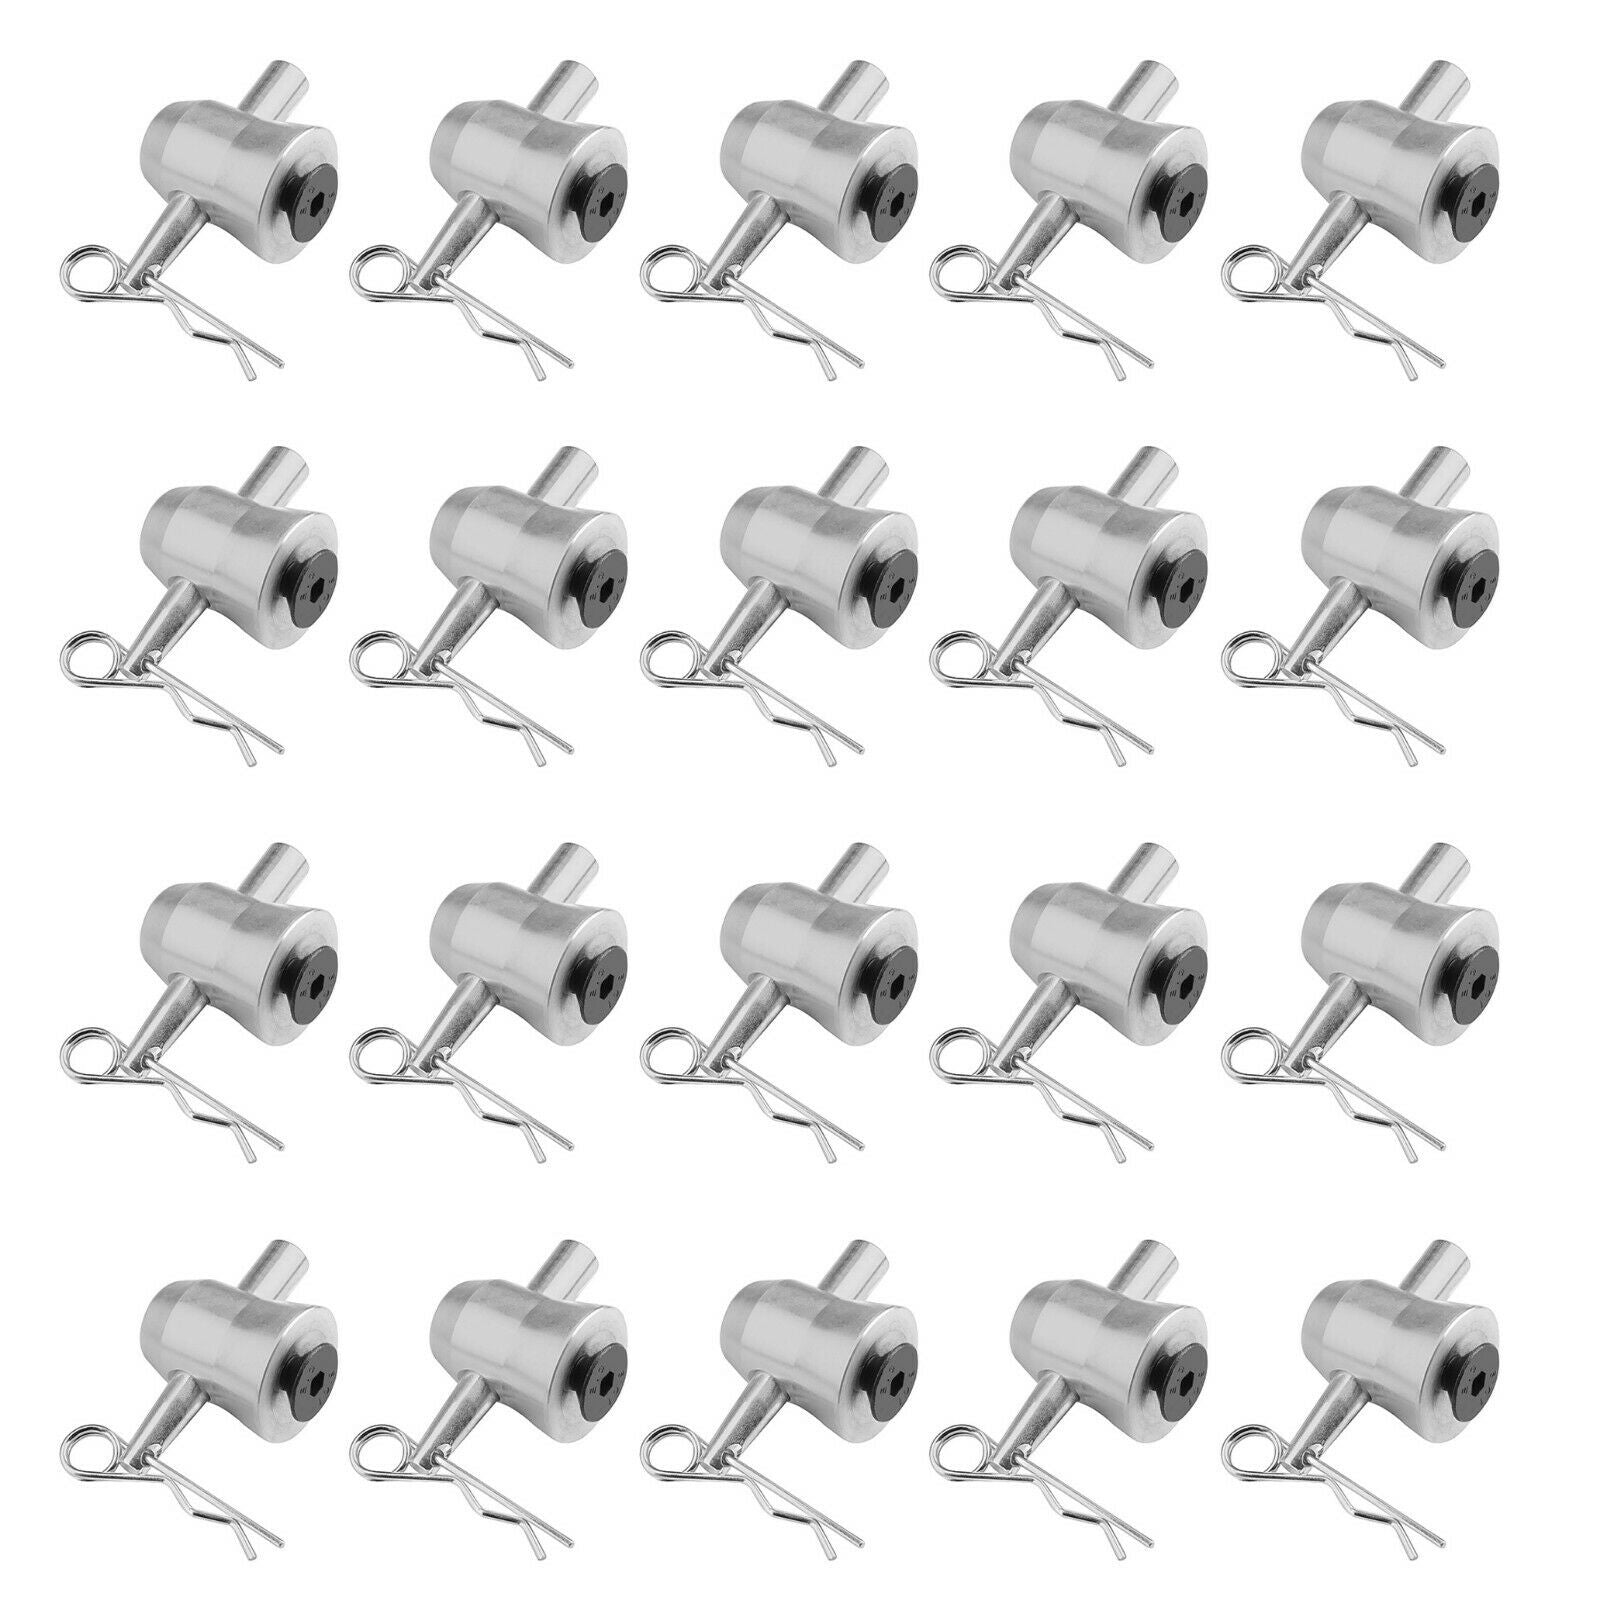 20x Half Conical Coupler for Truss DJ Stage Lighting w/ Body Safety Clips Pins